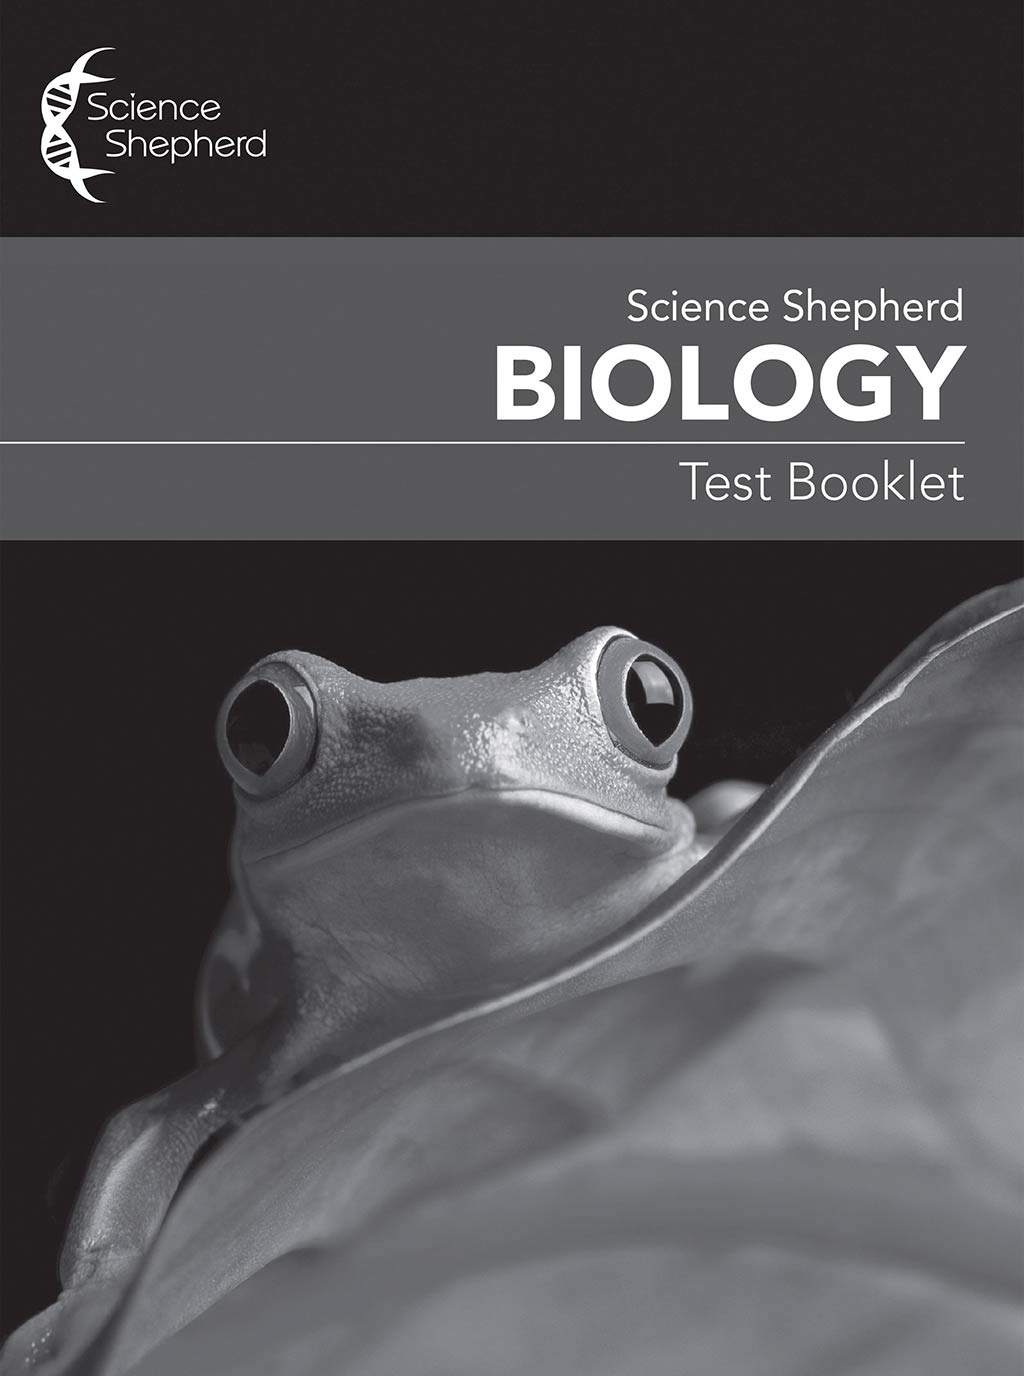 High school science homeschool Test Booklet cover of frog on leaf in grayscale